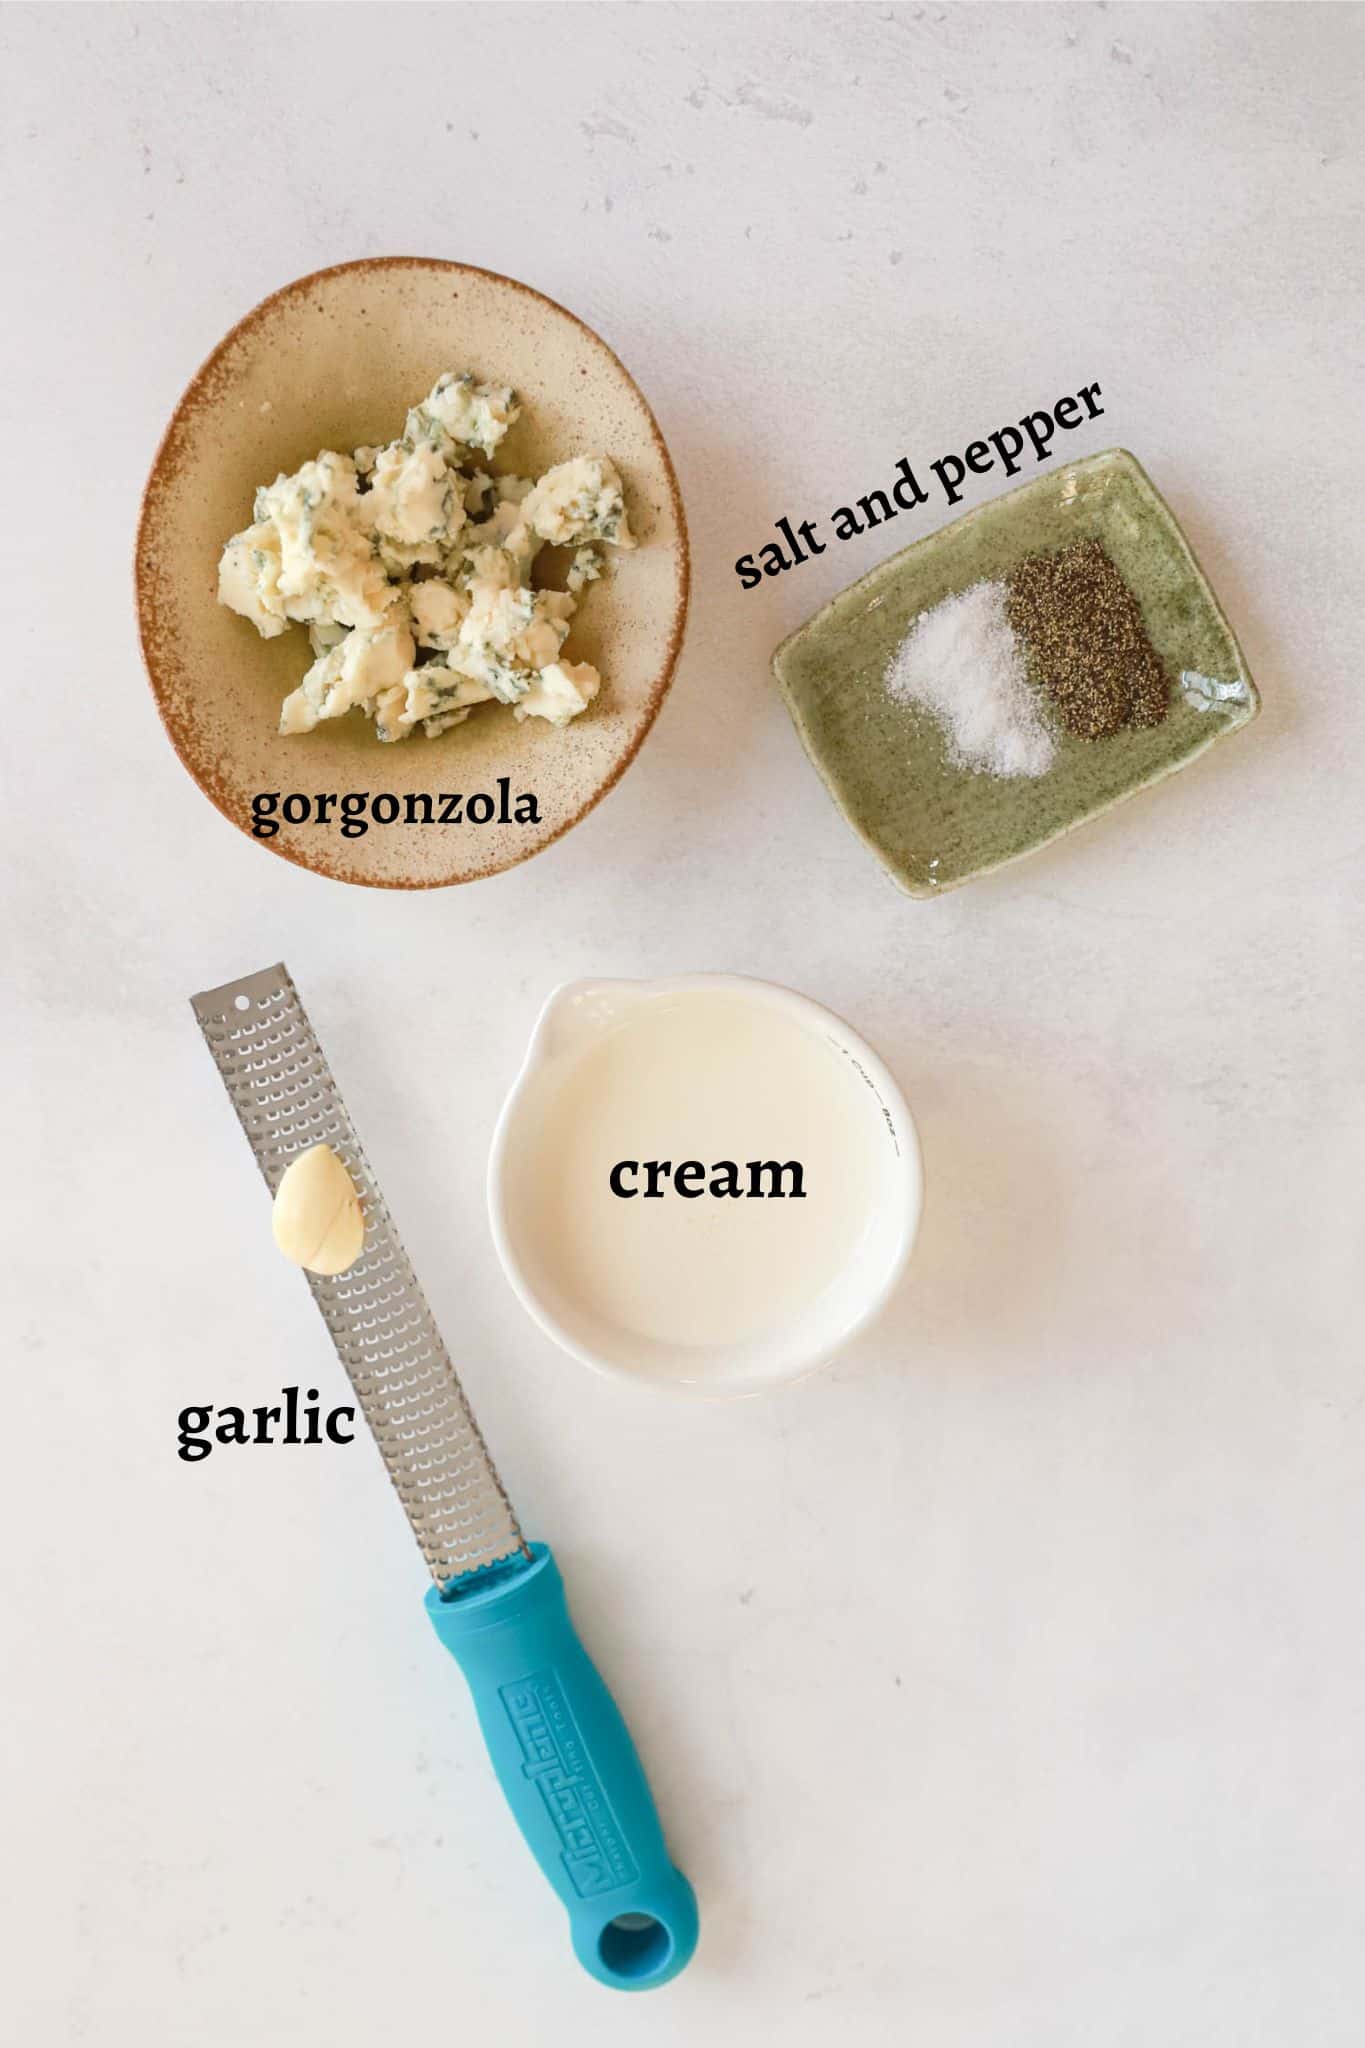 Ingredients for gorgonzola sauce labeled on a white background.